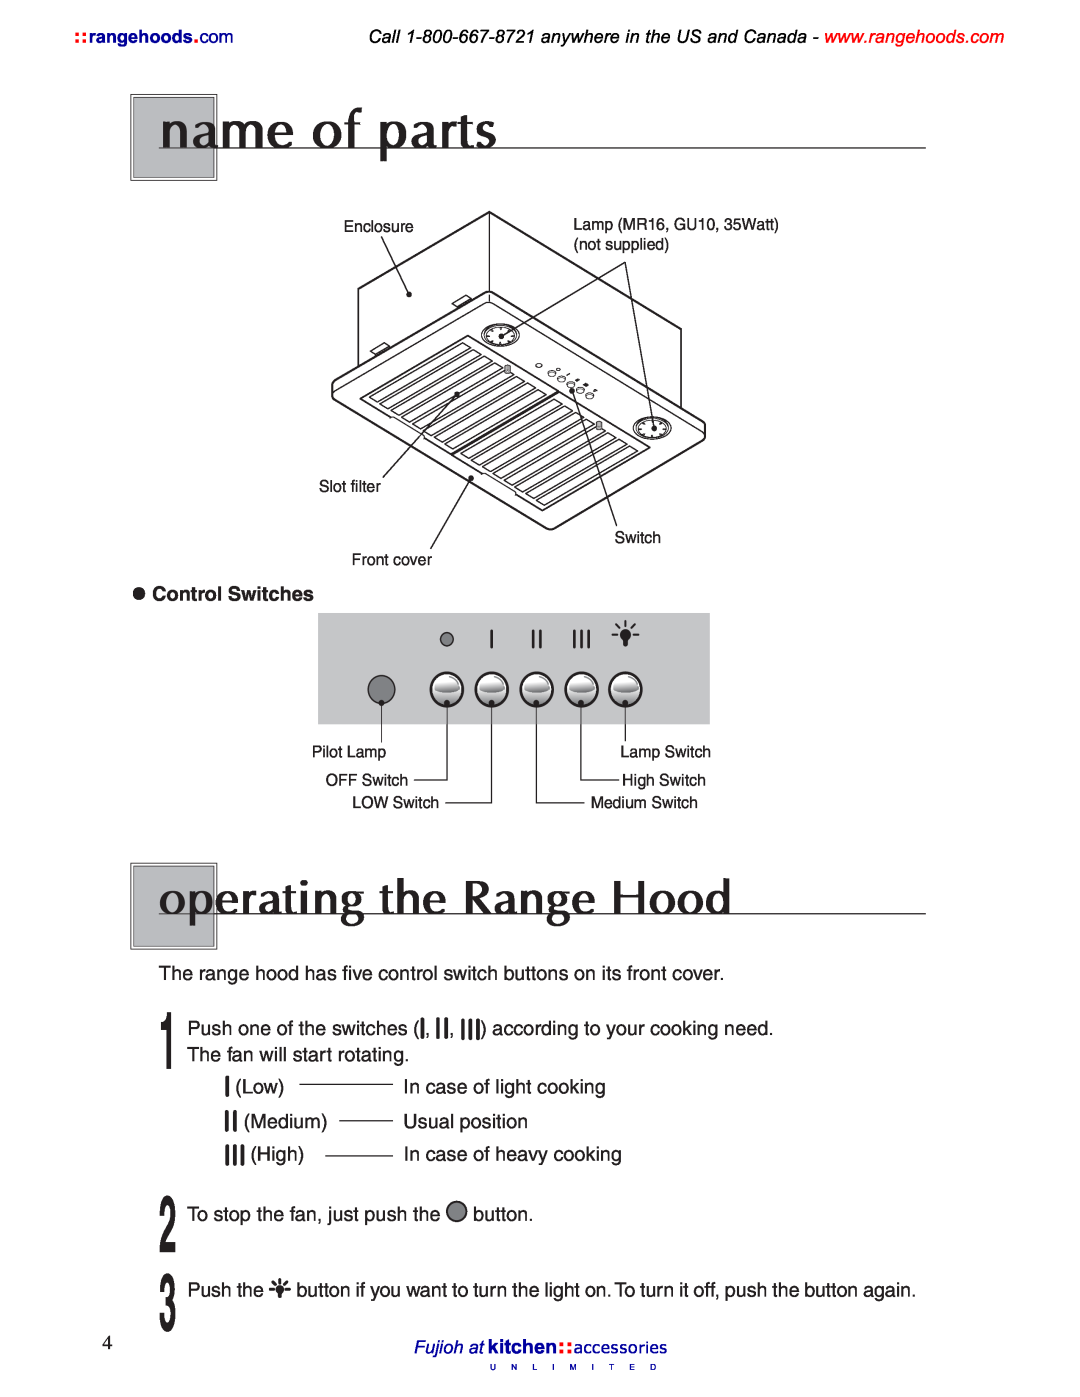 Fujioh BUF-011, 021 operation manual name of parts, operating the Range Hood, Control Switches 